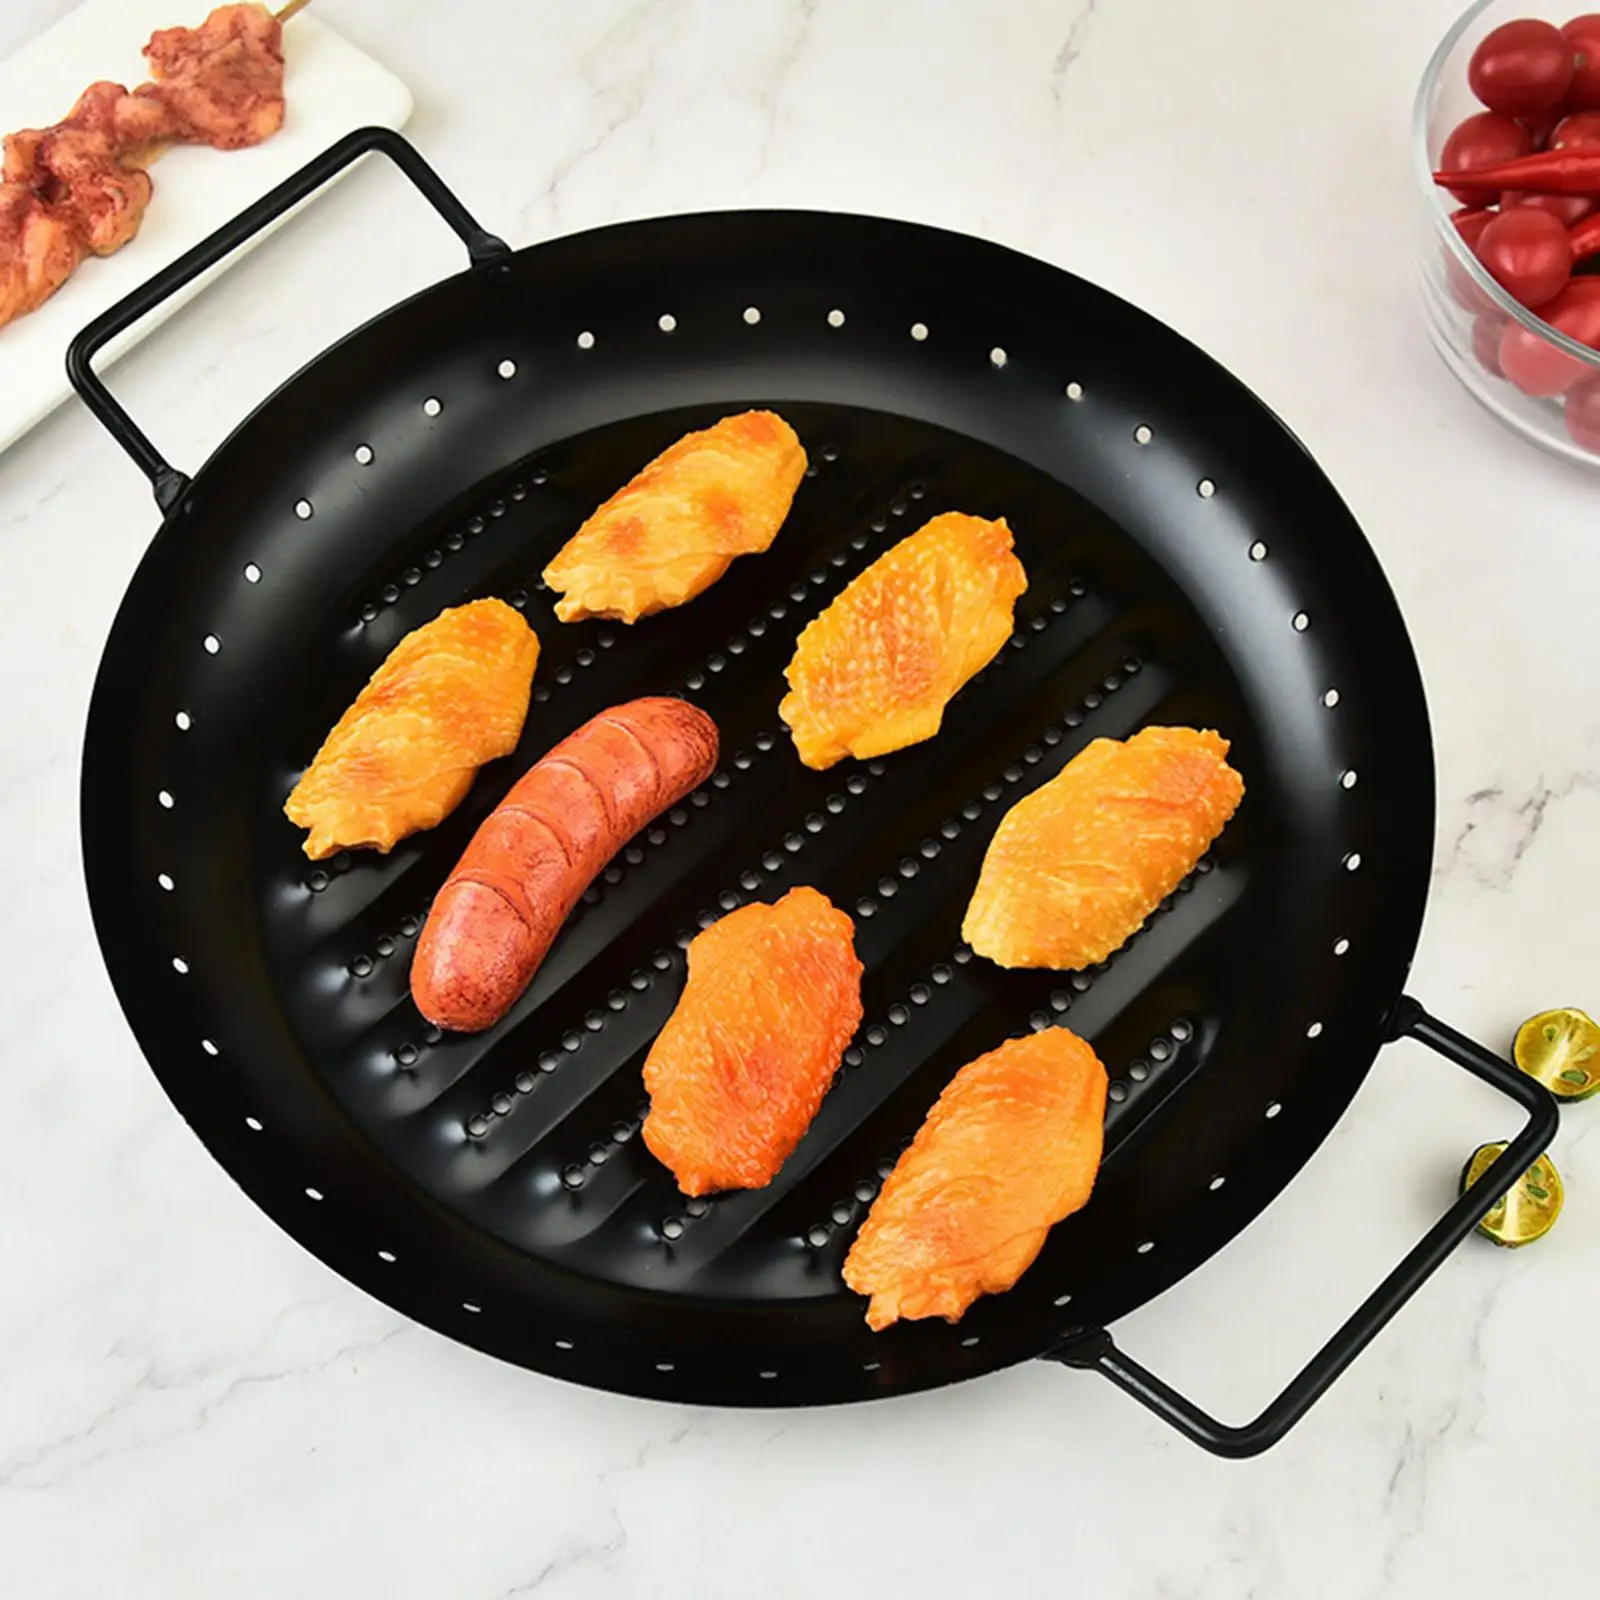 Grill Tray with Holes Nonstick Durable Grill Plate BBQ Accessories Grill Topper Pans for Camping Home Kitchen Restaurant Meat